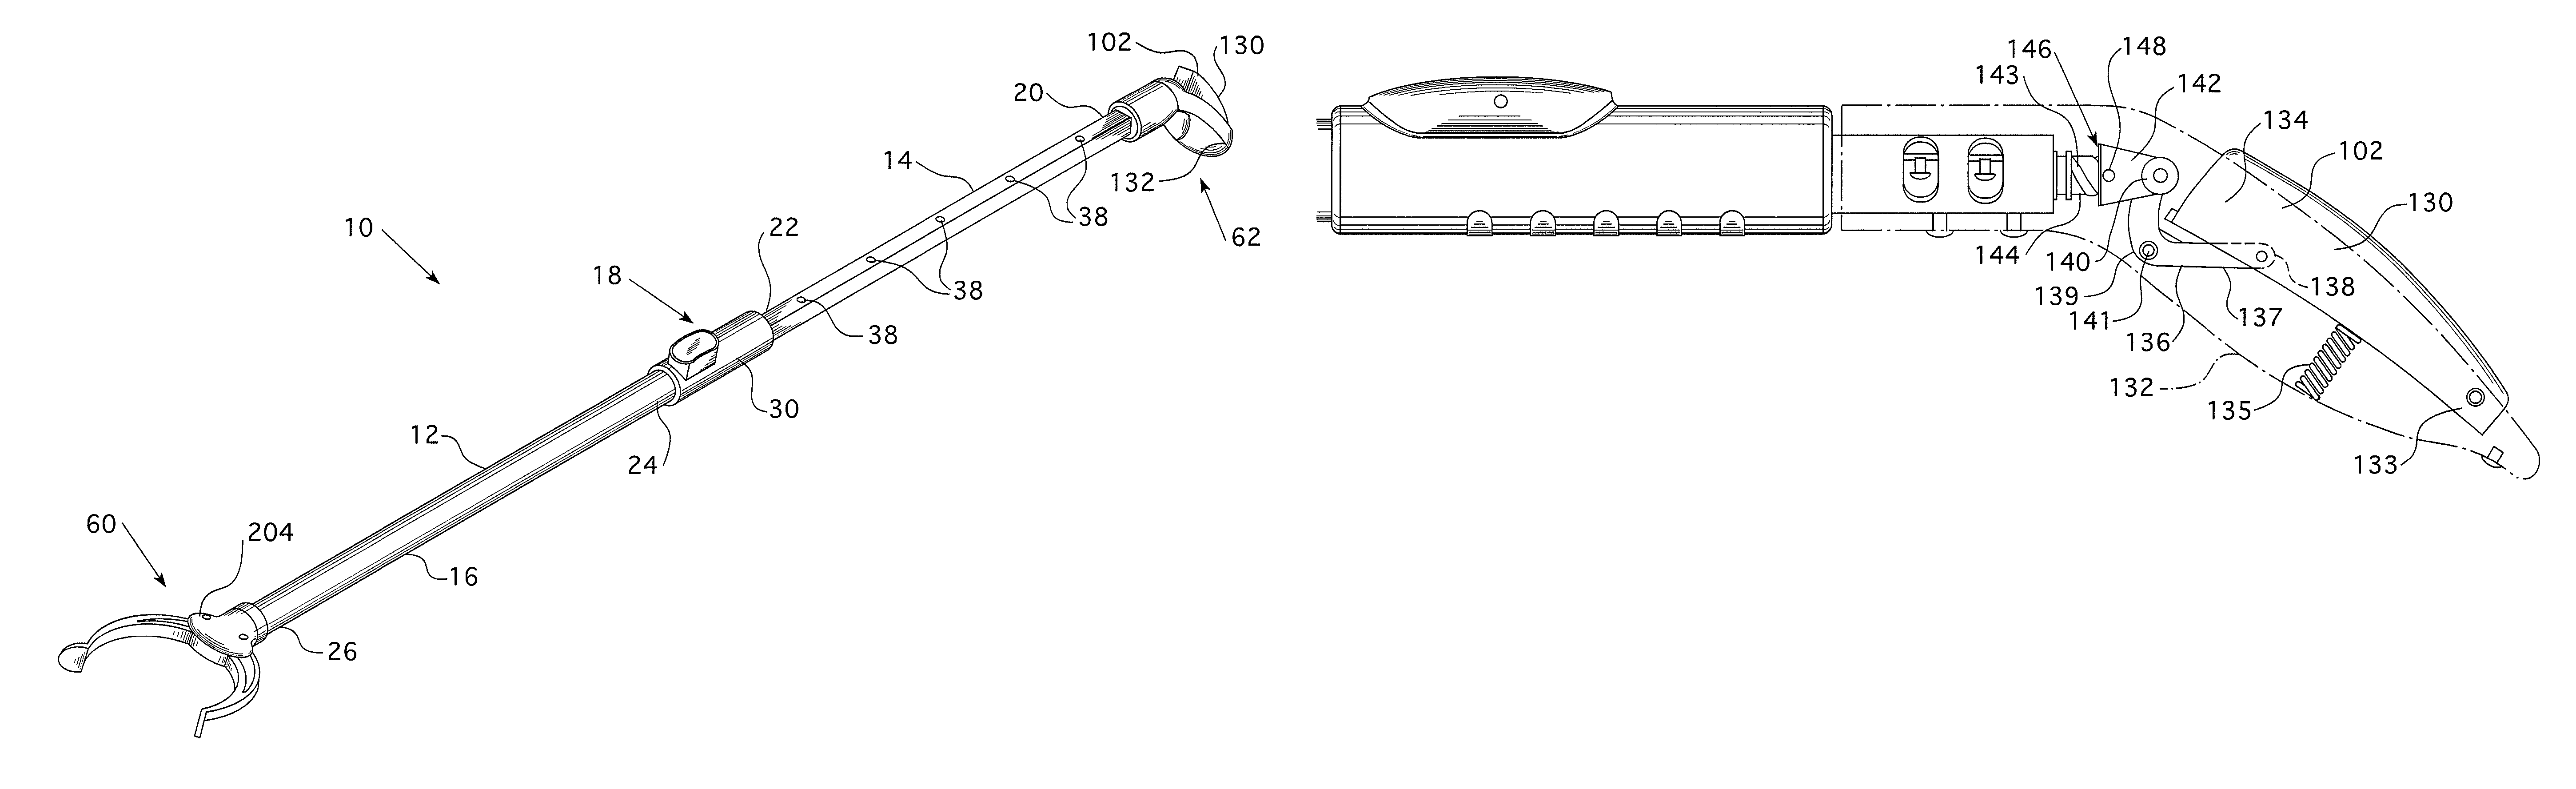 Extendable reaching tool